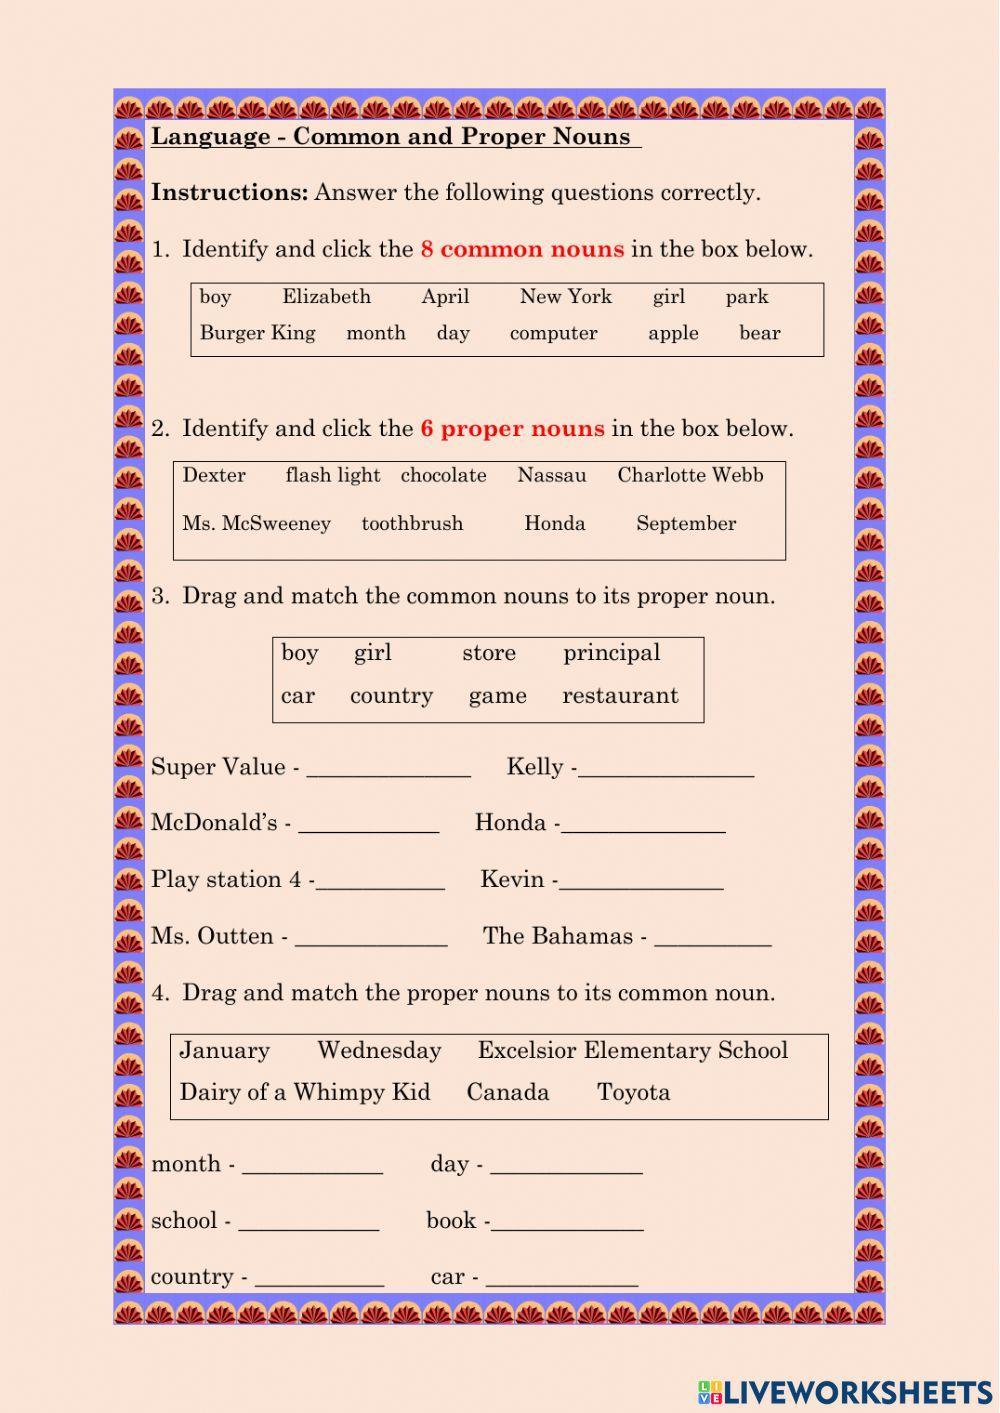 Common and Proper Nouns Review